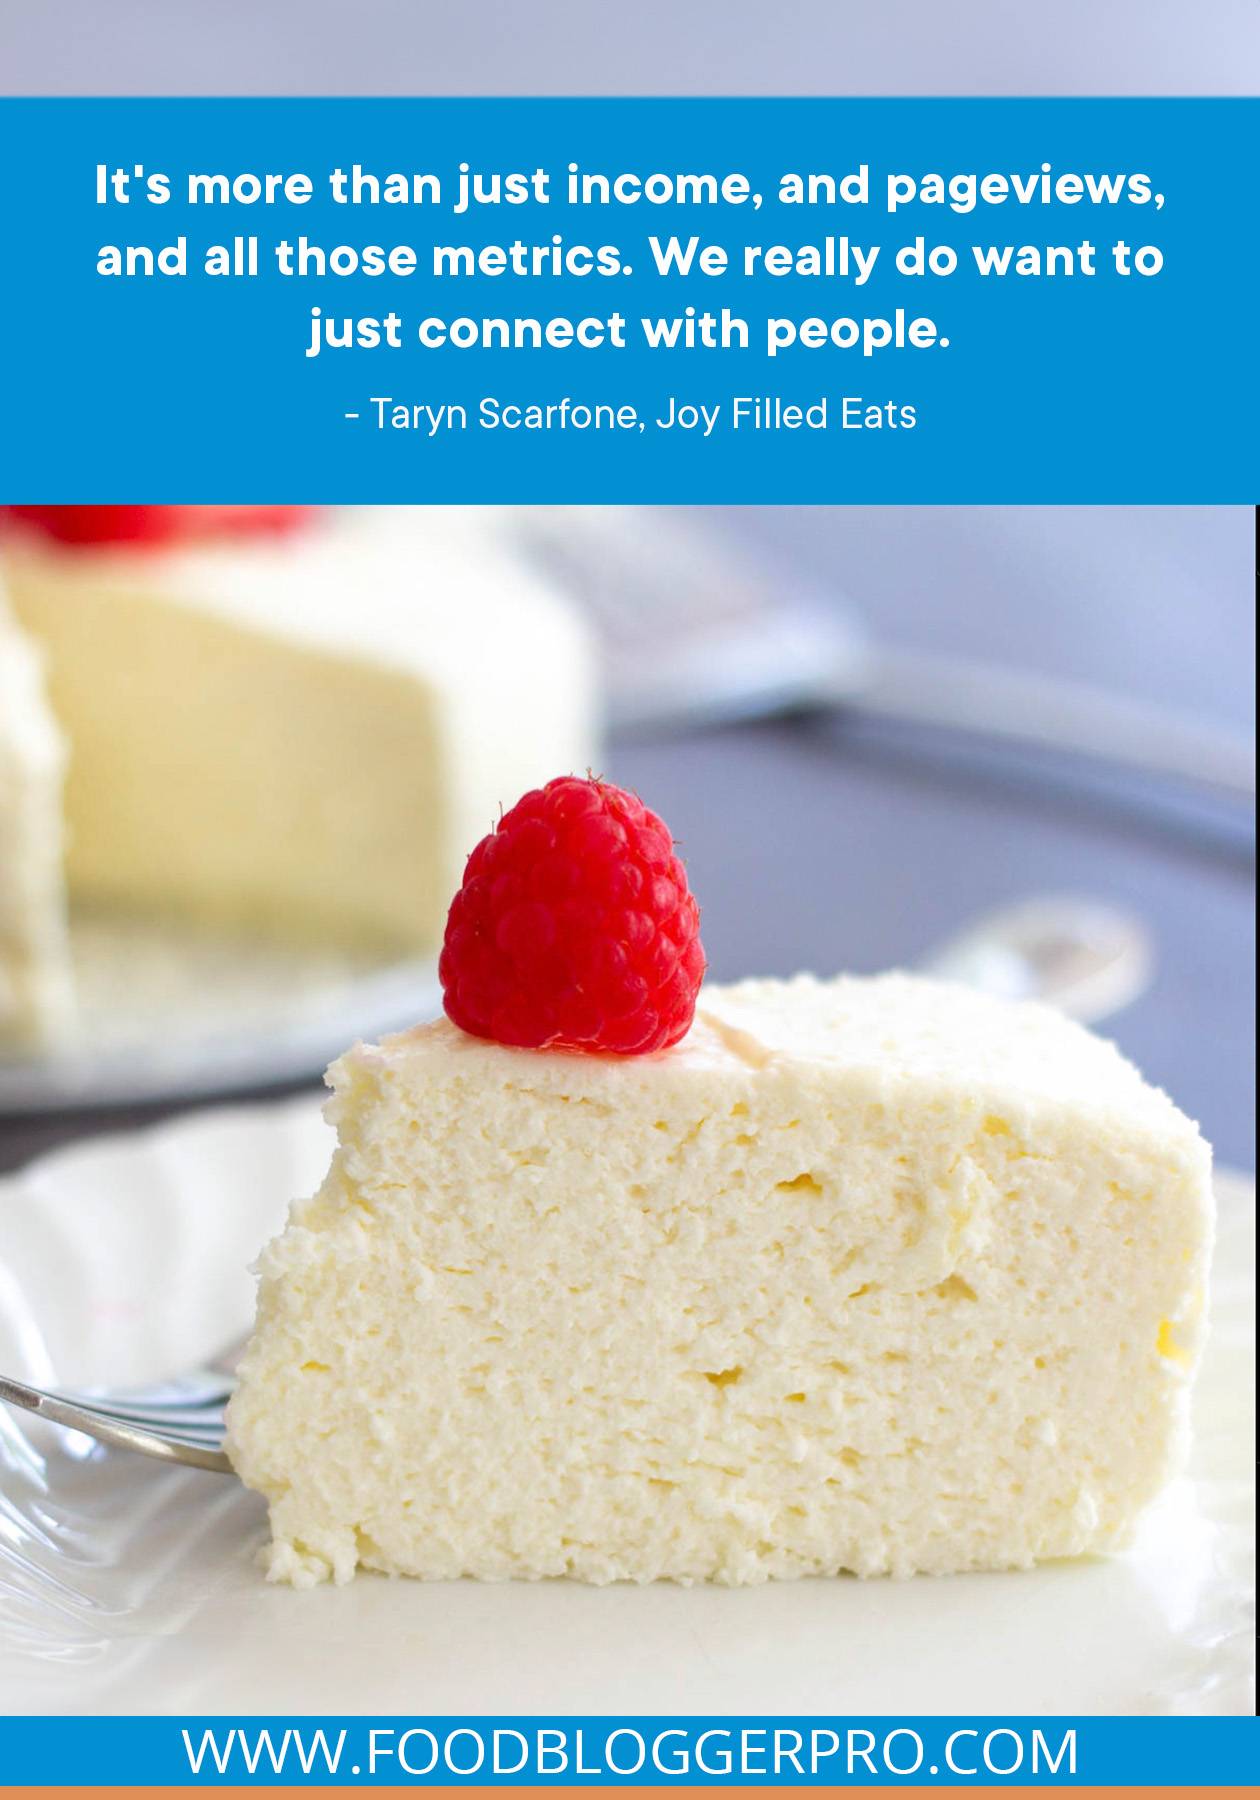 A photograph of a slice of cake with a raspberry on top and a quote from Taryn Scarfone's episode of The Food Blogger Pro Podcast that reads, "It's more than just income, and pageviews, and all those metrics. We really do want to just connect with people."